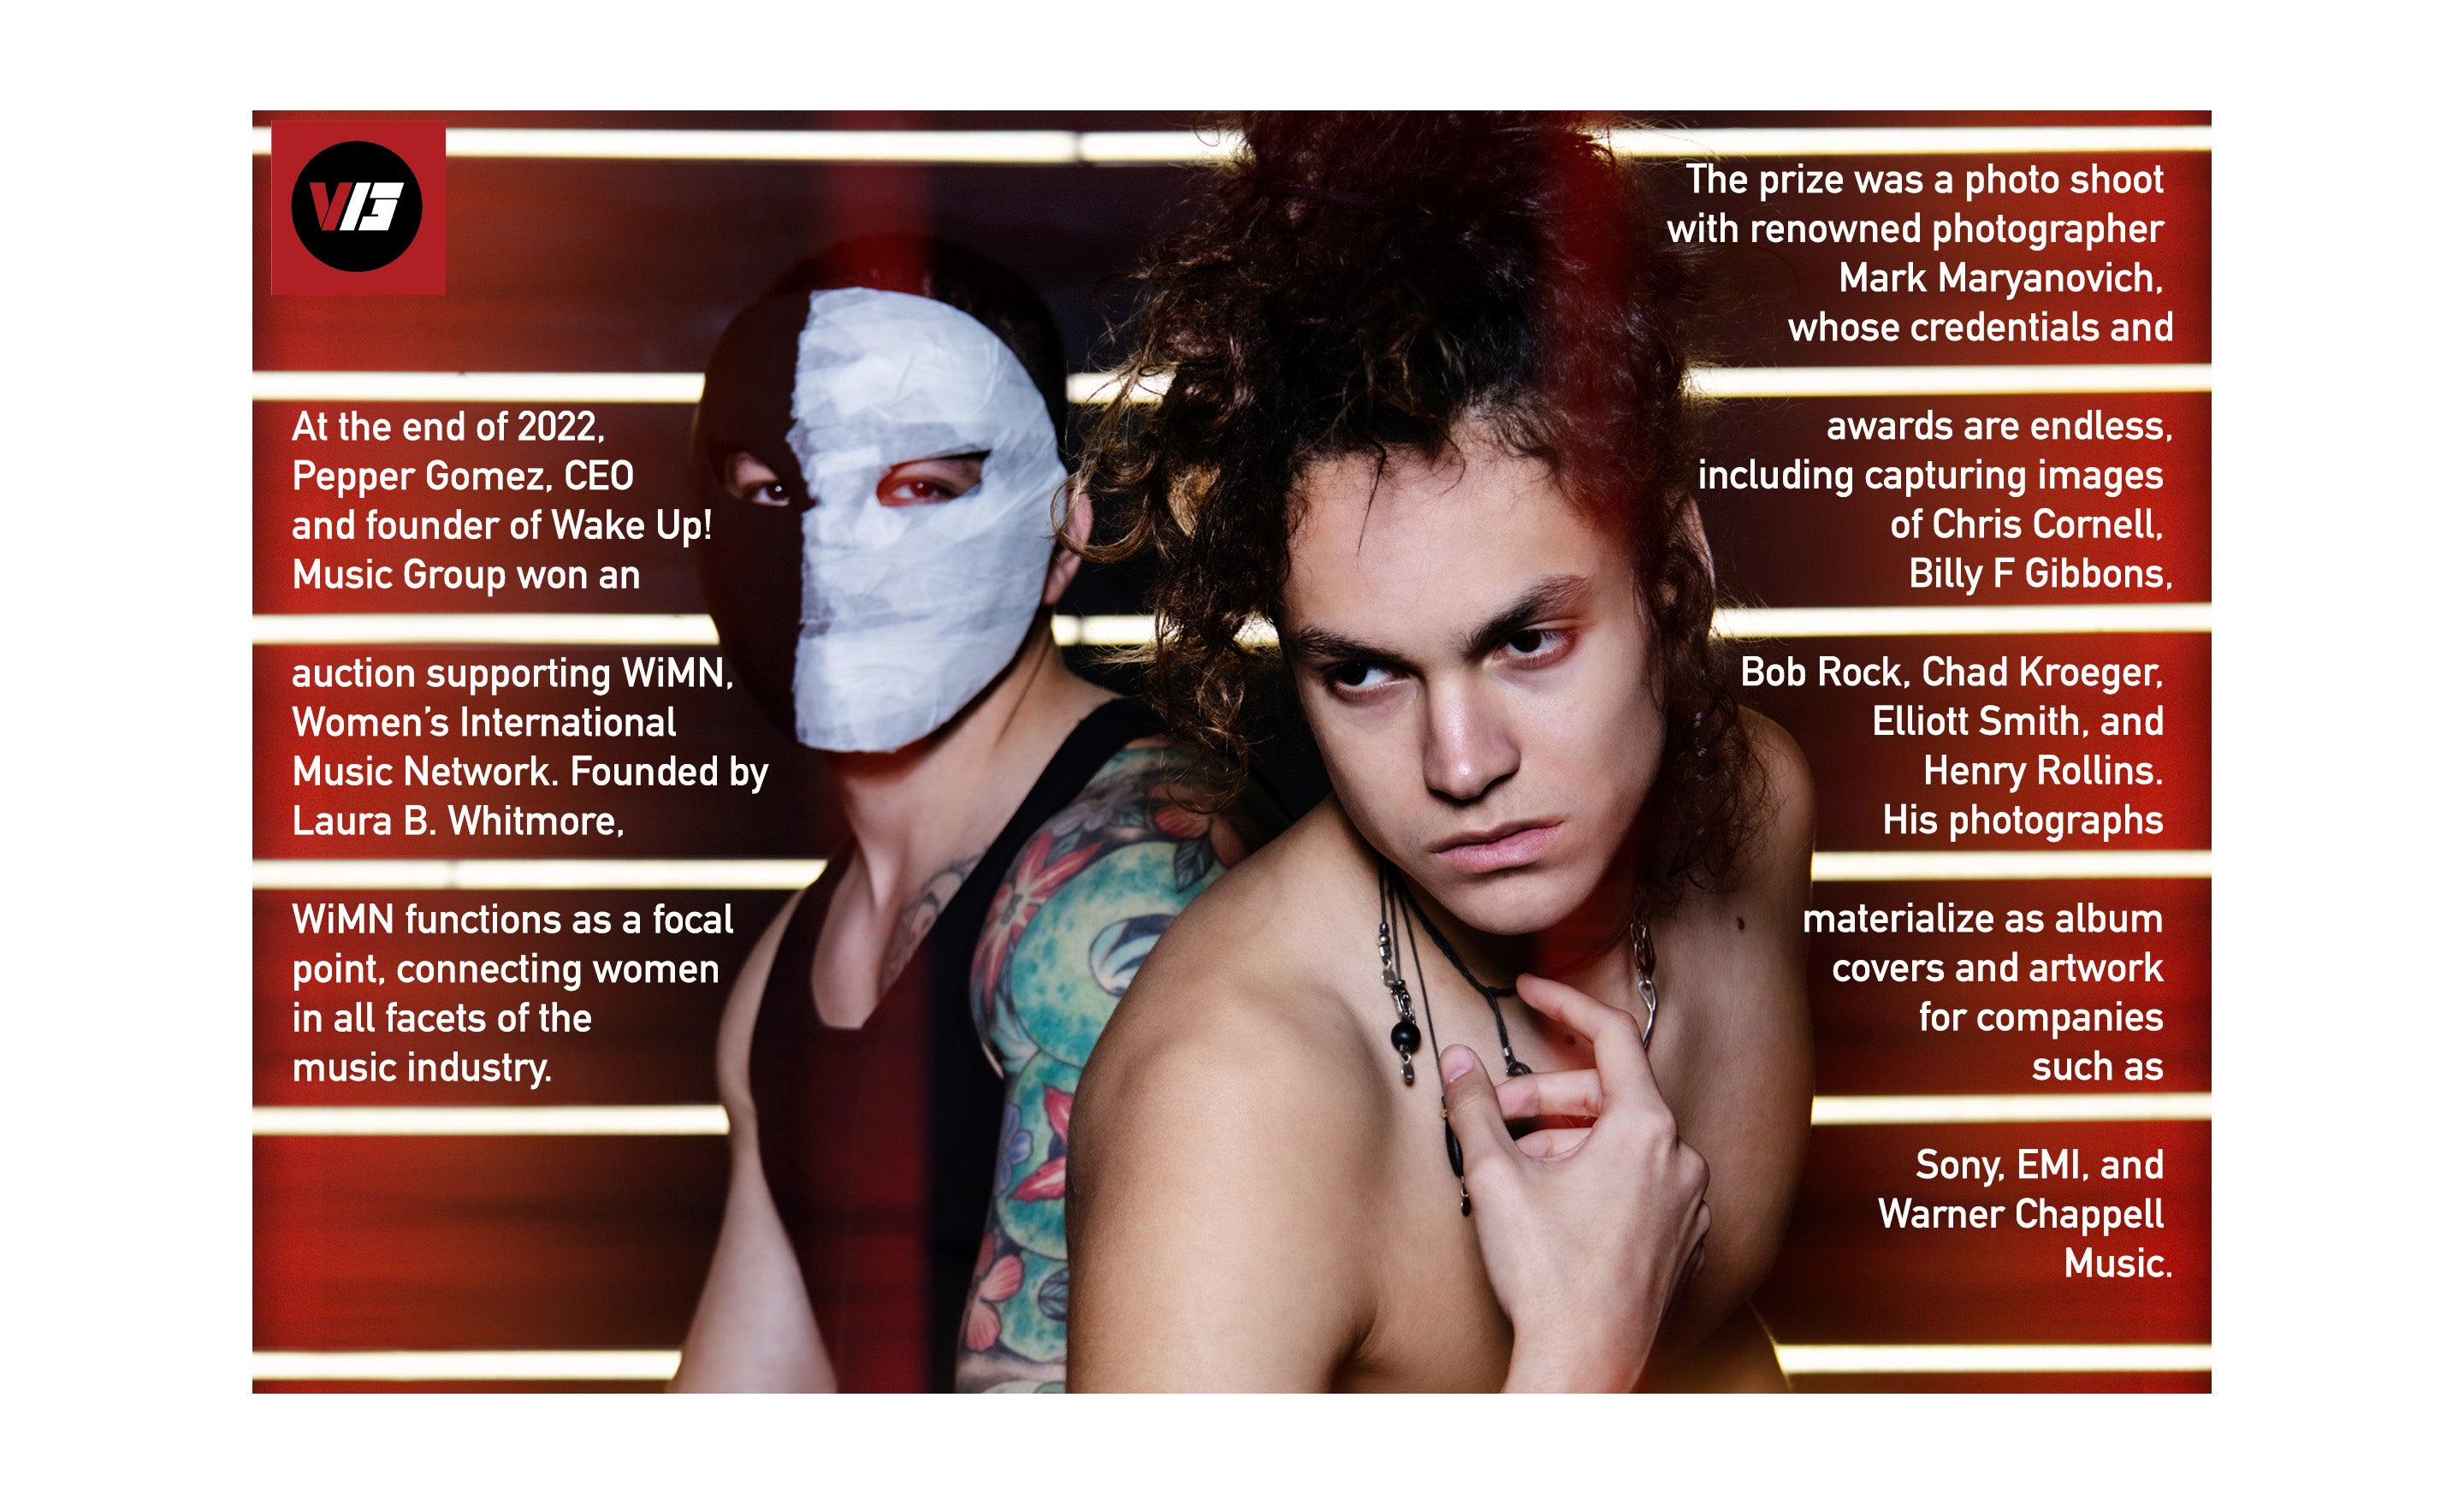 LA portrait photographer Mark Maryanovich V13 Media article page 2 portrait of music duo The ET Boys standing in front of red wall with horizontal lines of white lights one bare chested and the other wearing a black and white full face mask